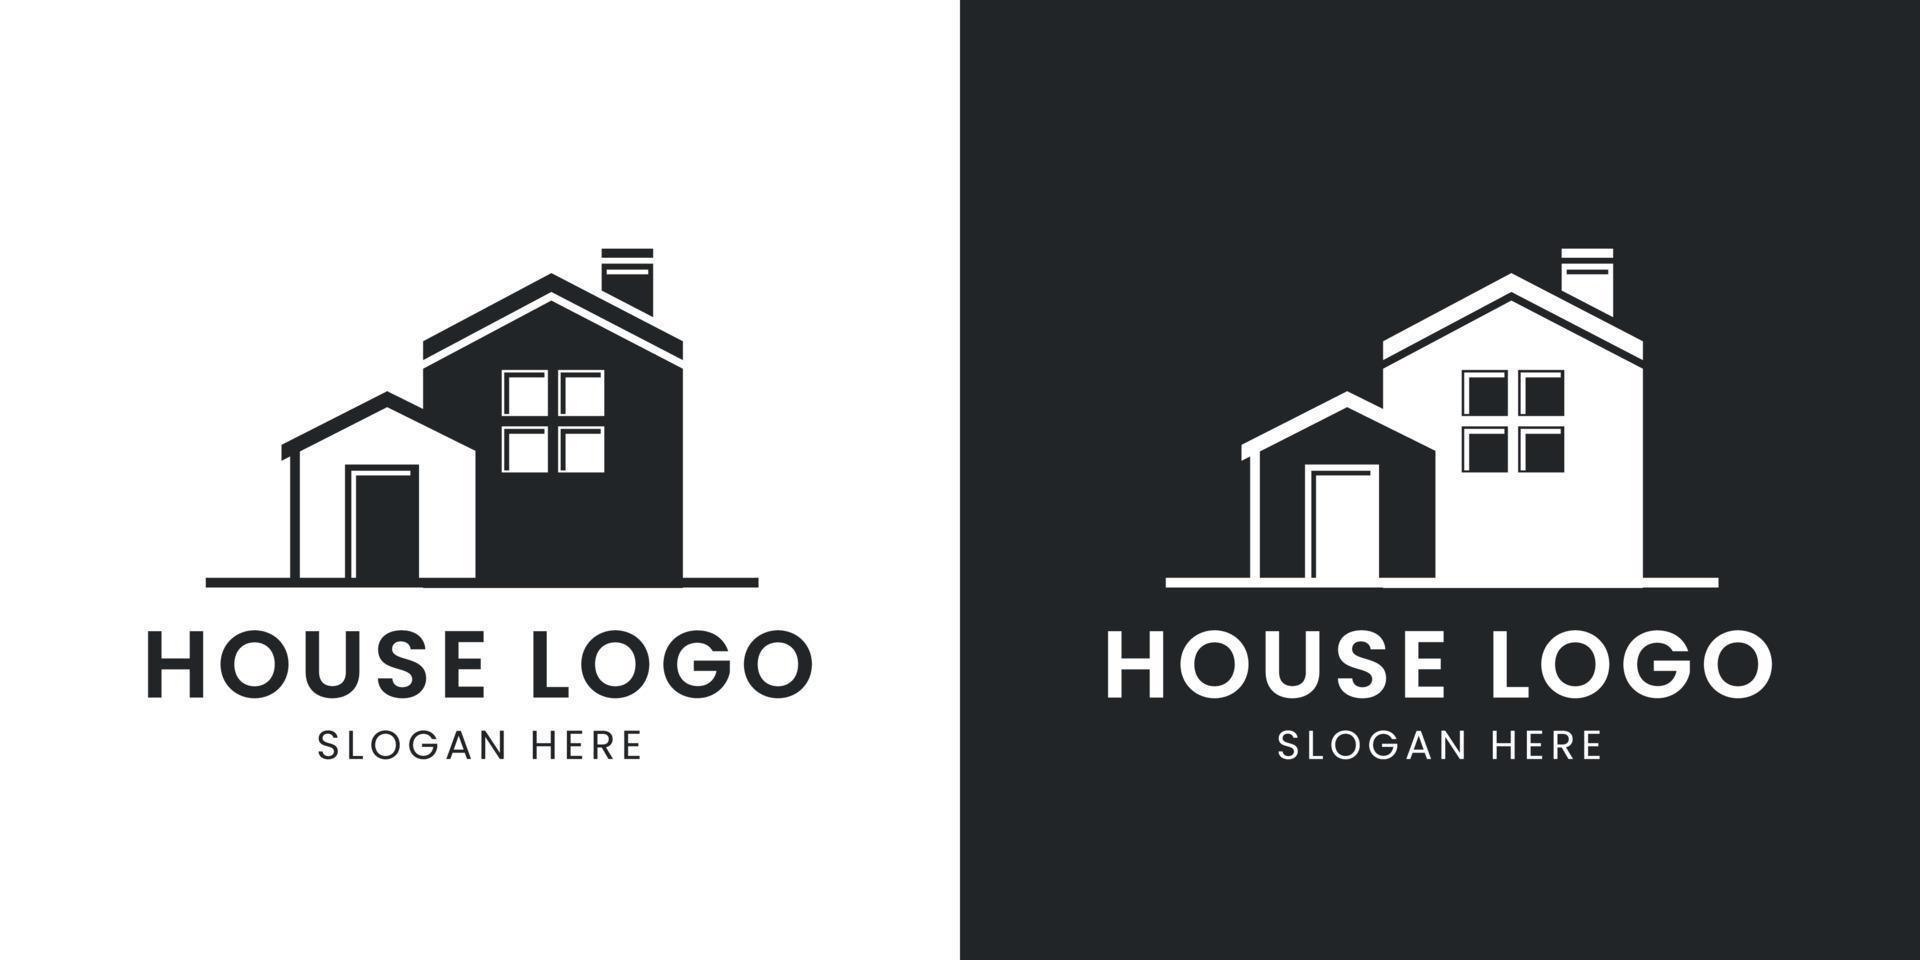 house logo in black and white vector